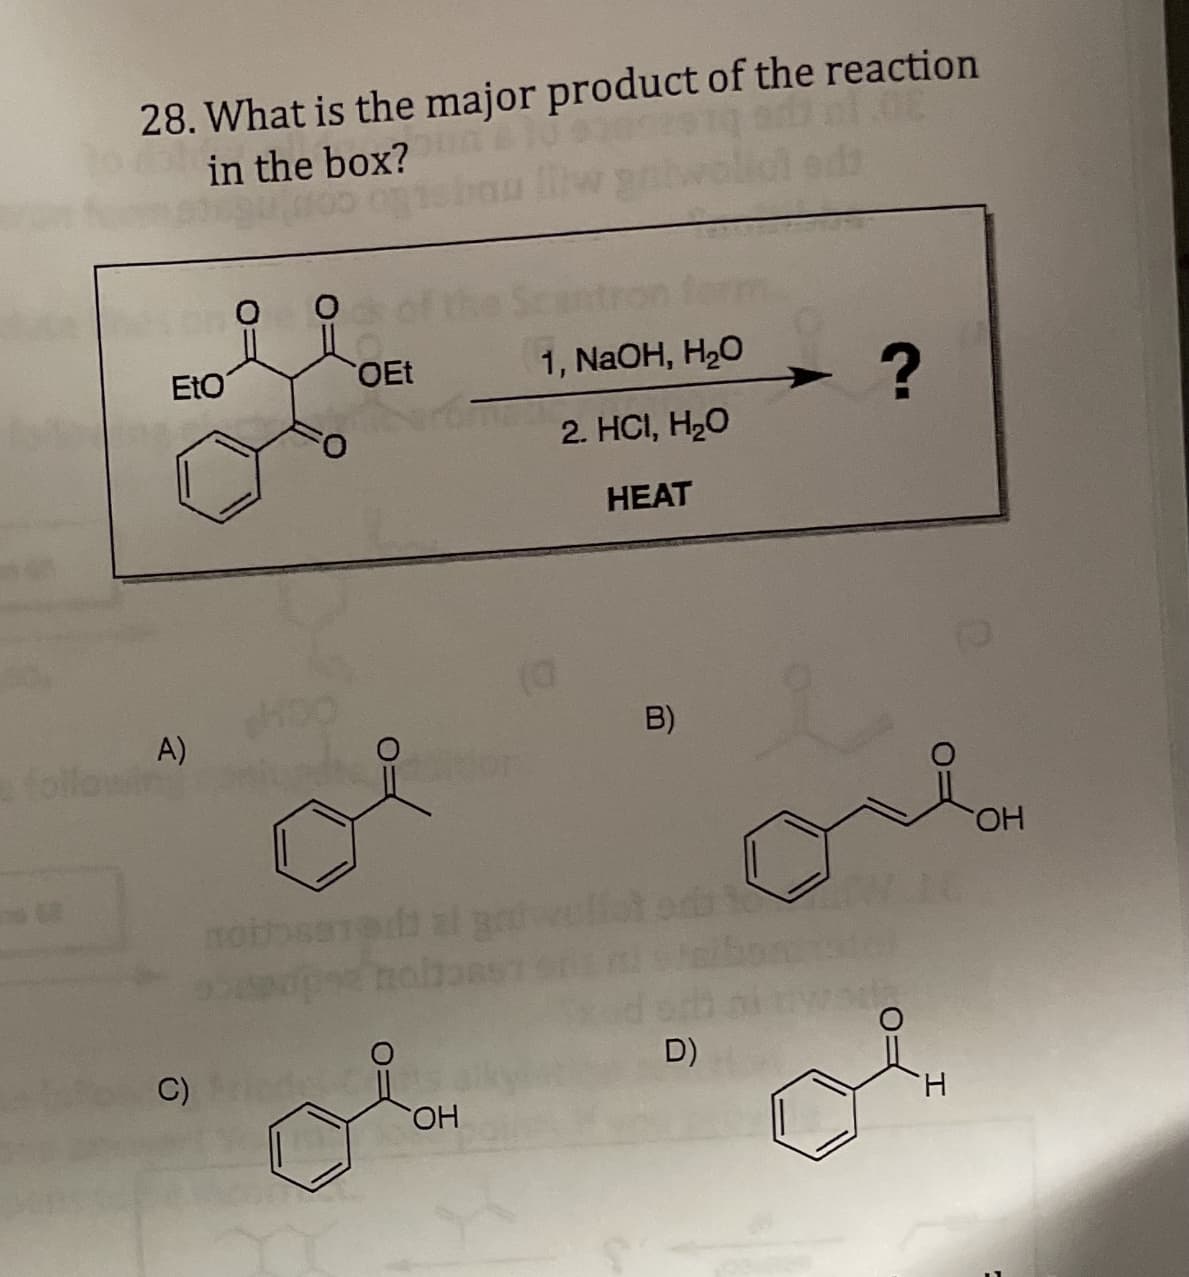 28. What is the major product of the reaction
in the box?n
EtO
OEt
1, NaOH, H2O
2. HCI, H20
НЕАТ
B)
A)
followin
CHO.
s al p
D)
C) e
